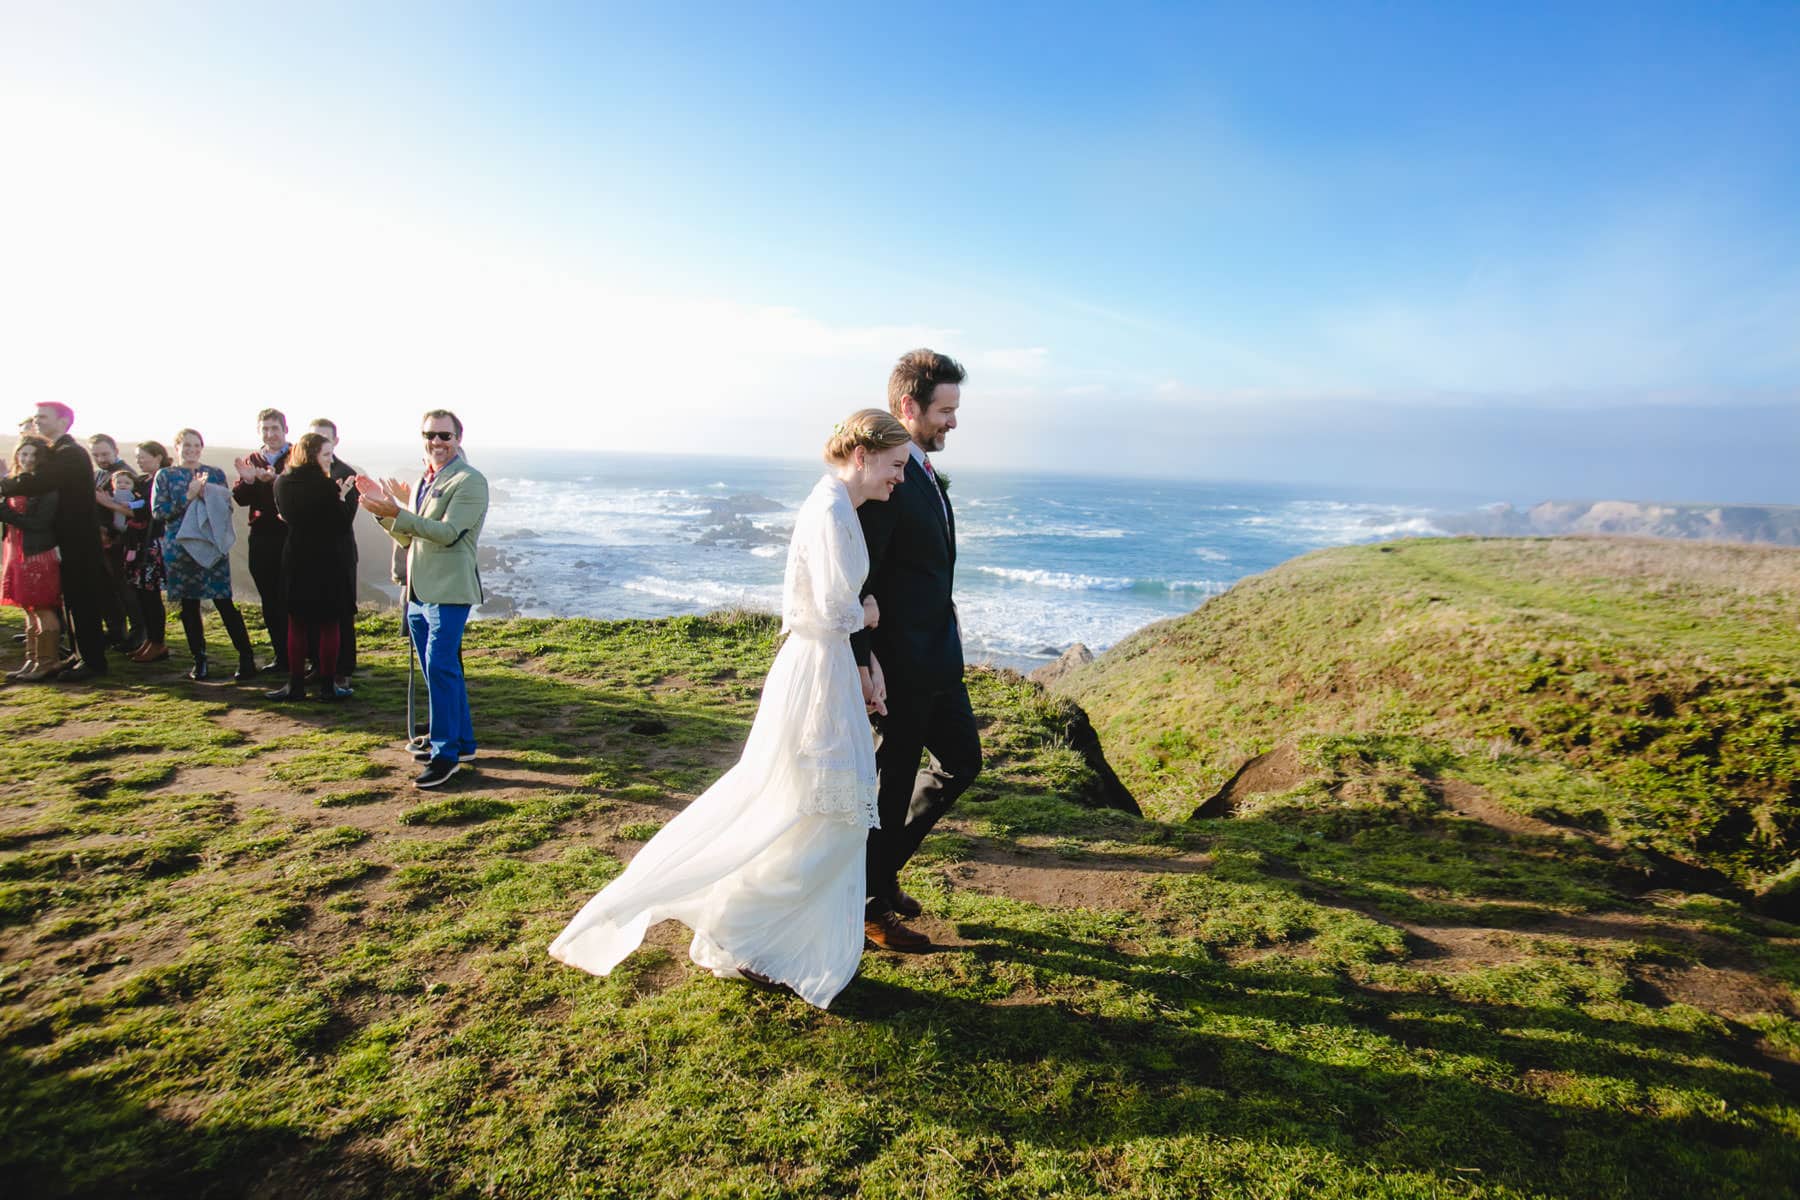 Bride and groom walking away with ocean in the background